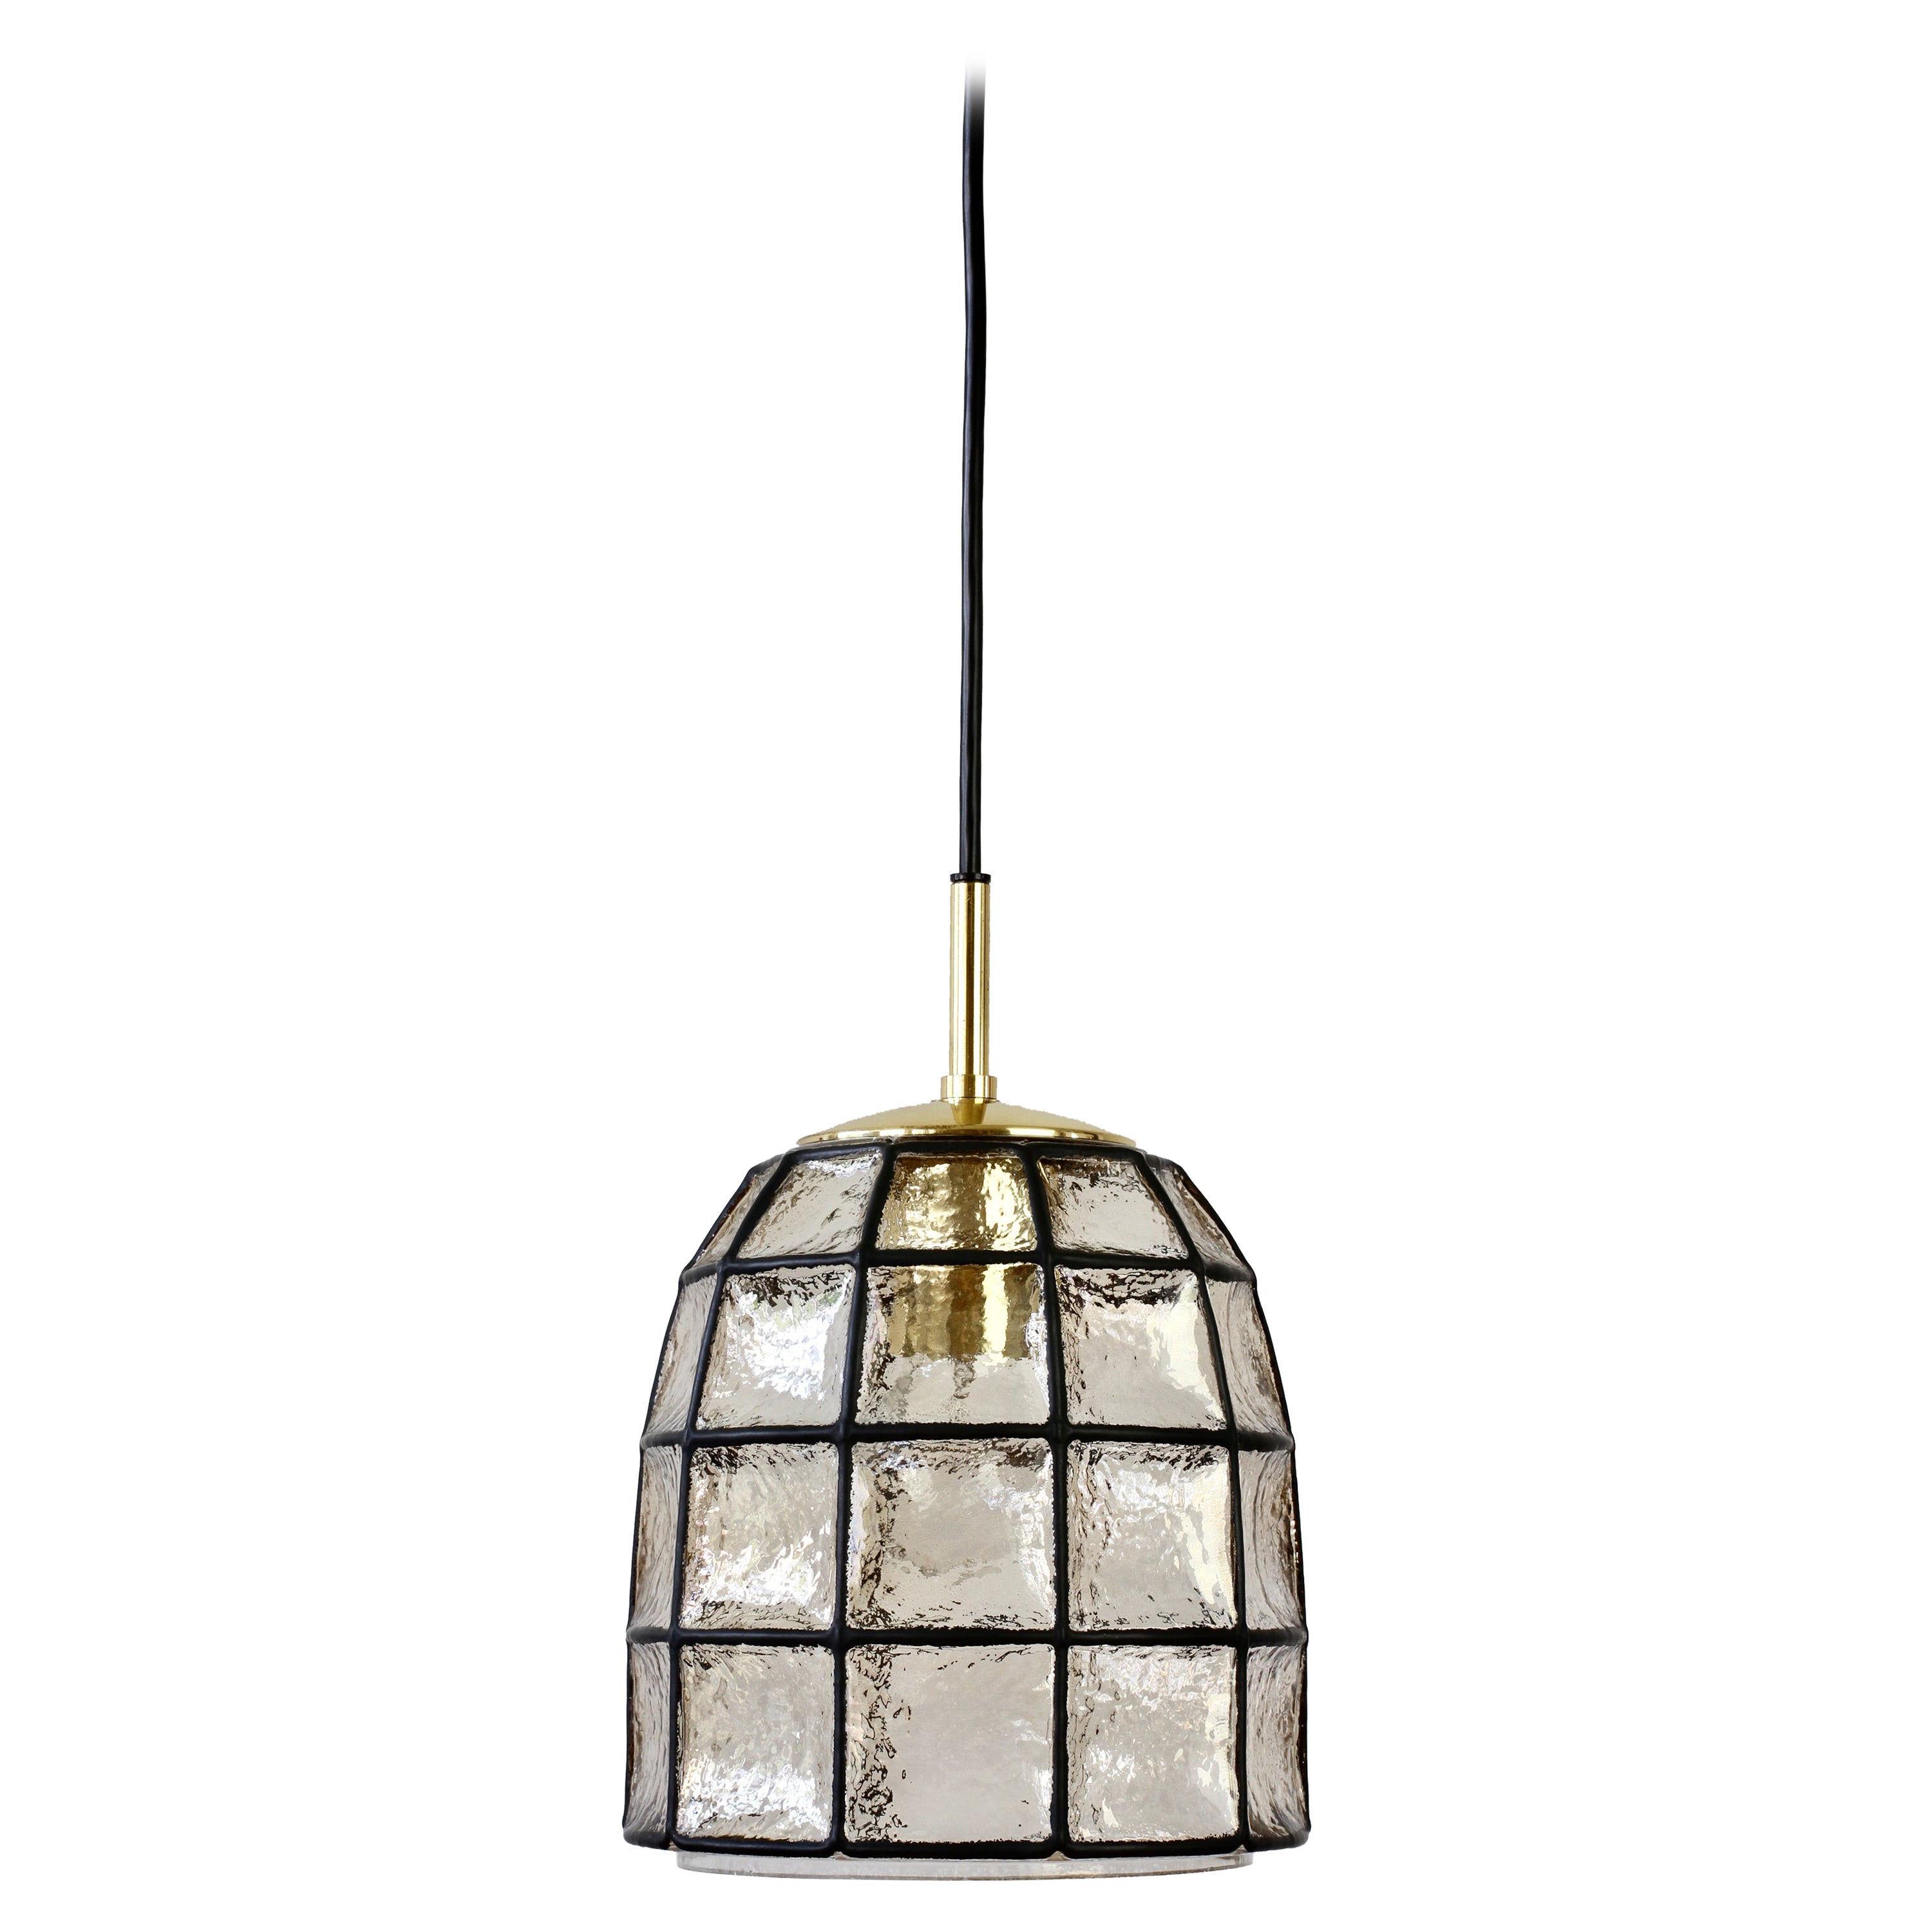 Limburg Mid-Century Vintage Glass and Brass Bell Pendant Light / Lamp, 1960s For Sale